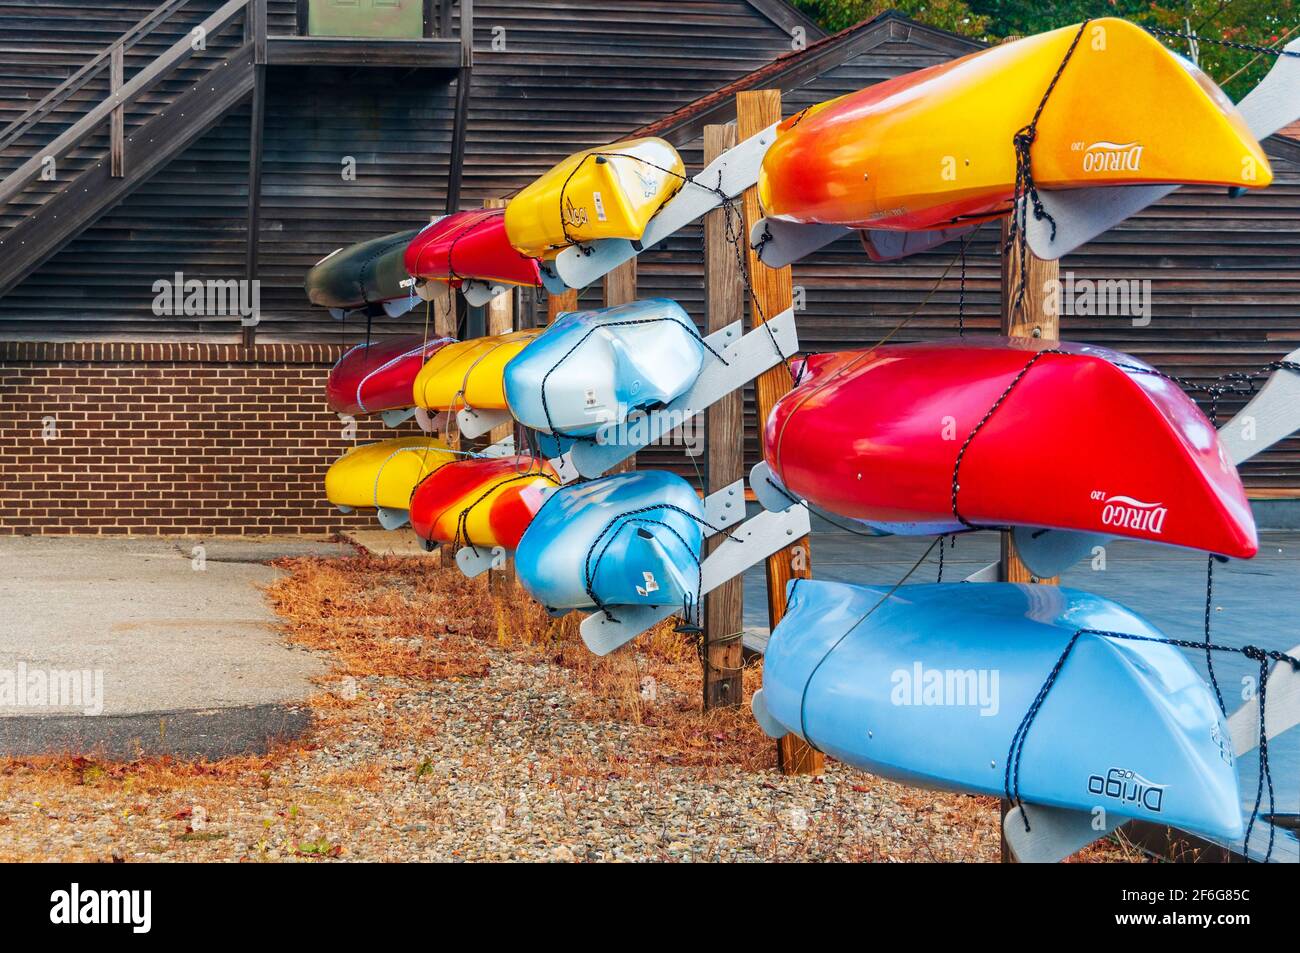 A rack of colorful blue, red and yellow kayaks for rental or sale in New England, USA. Stock Photo